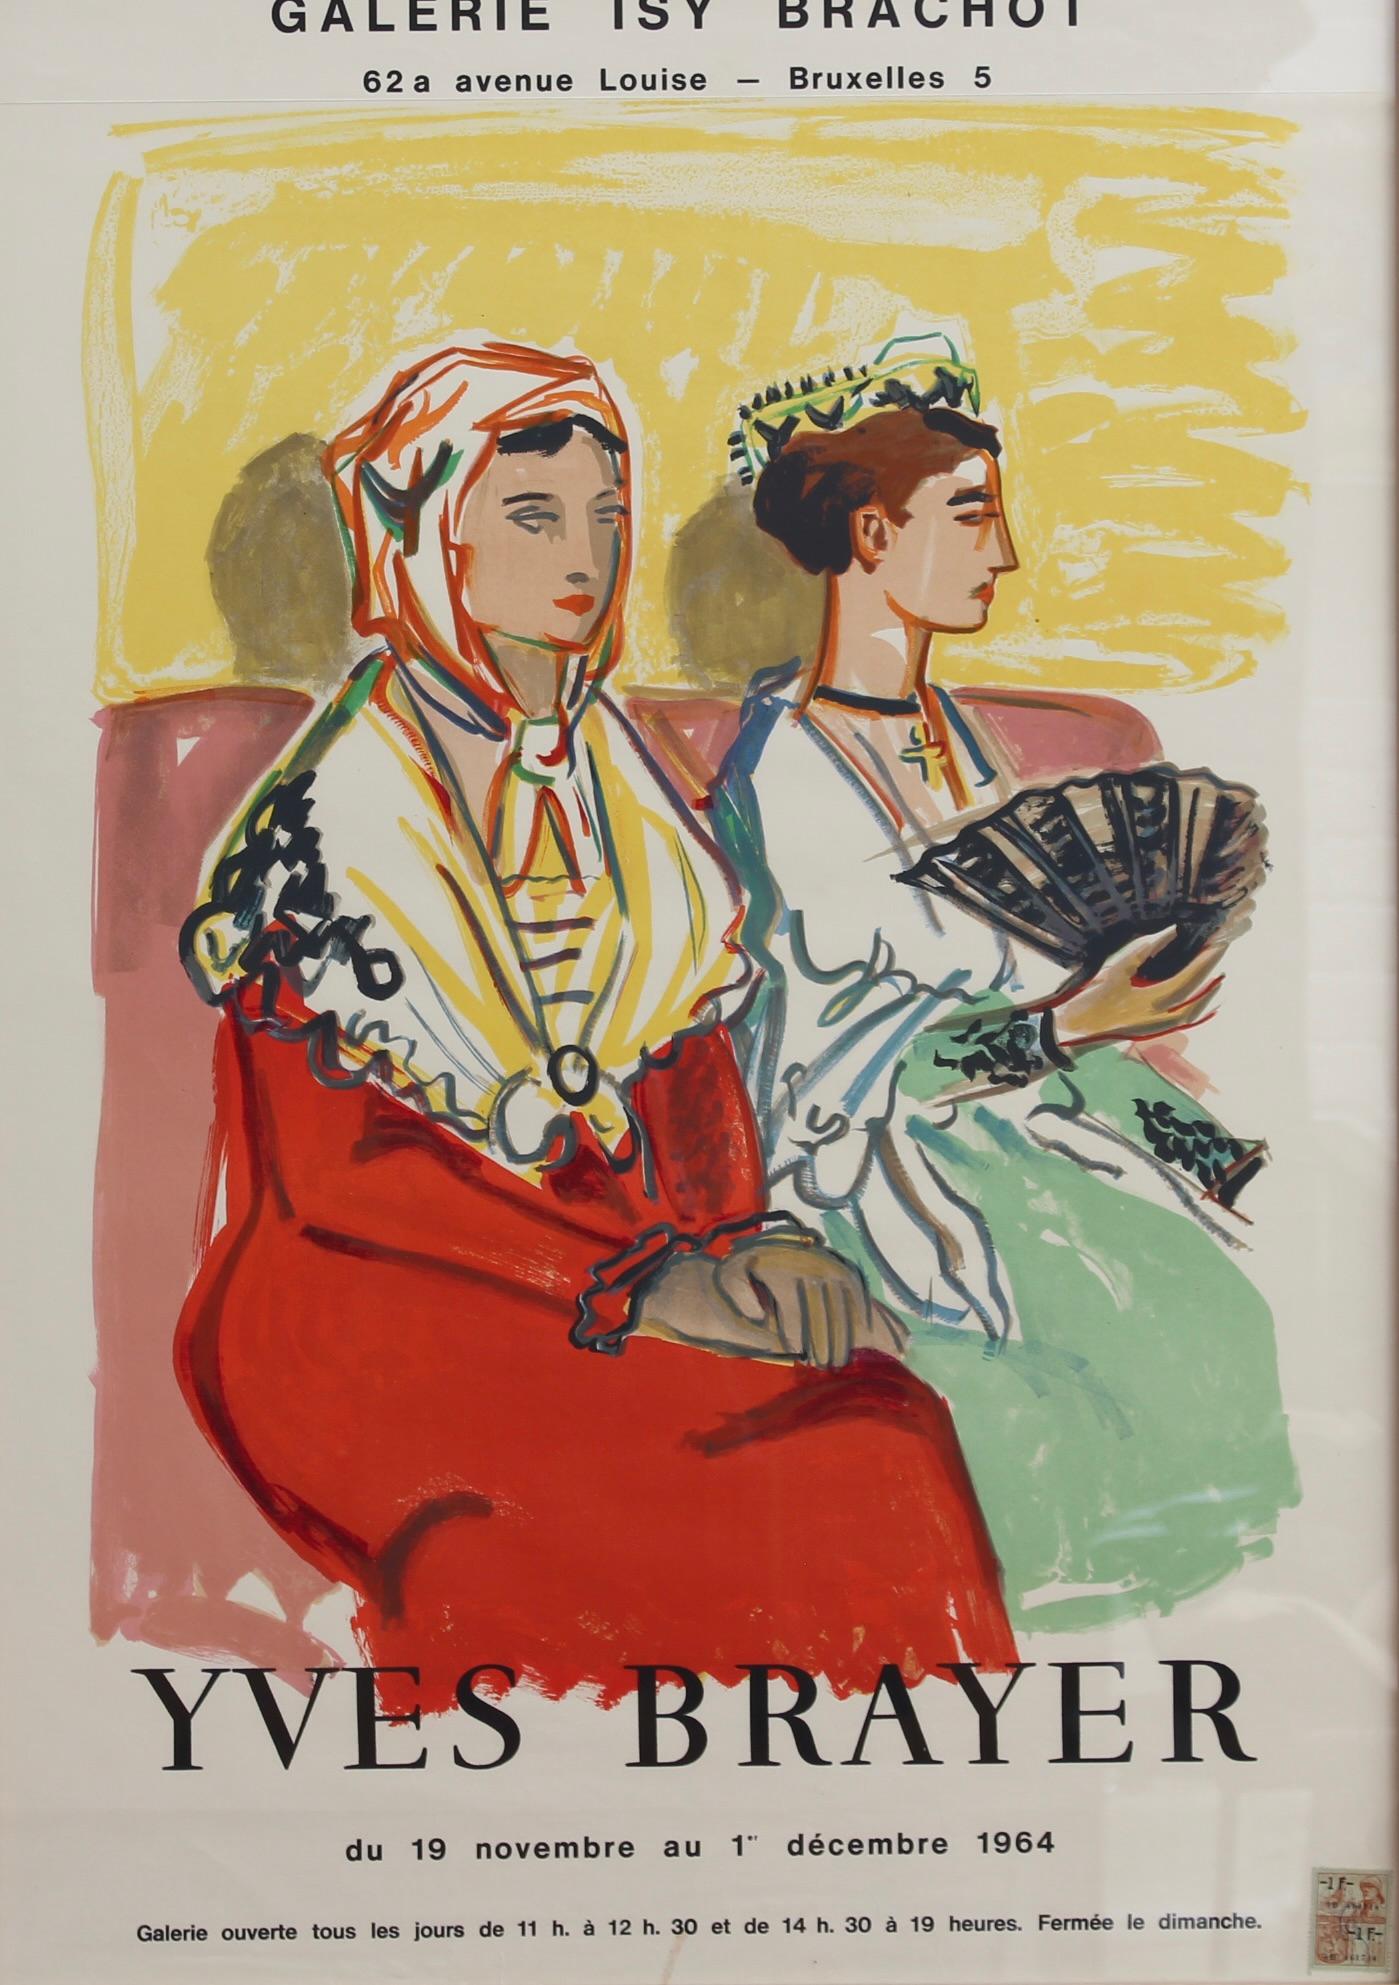 French Vintage Exhibition Poster for Yves Brayer - Galerie Isy Brachot Brussels For Sale 5